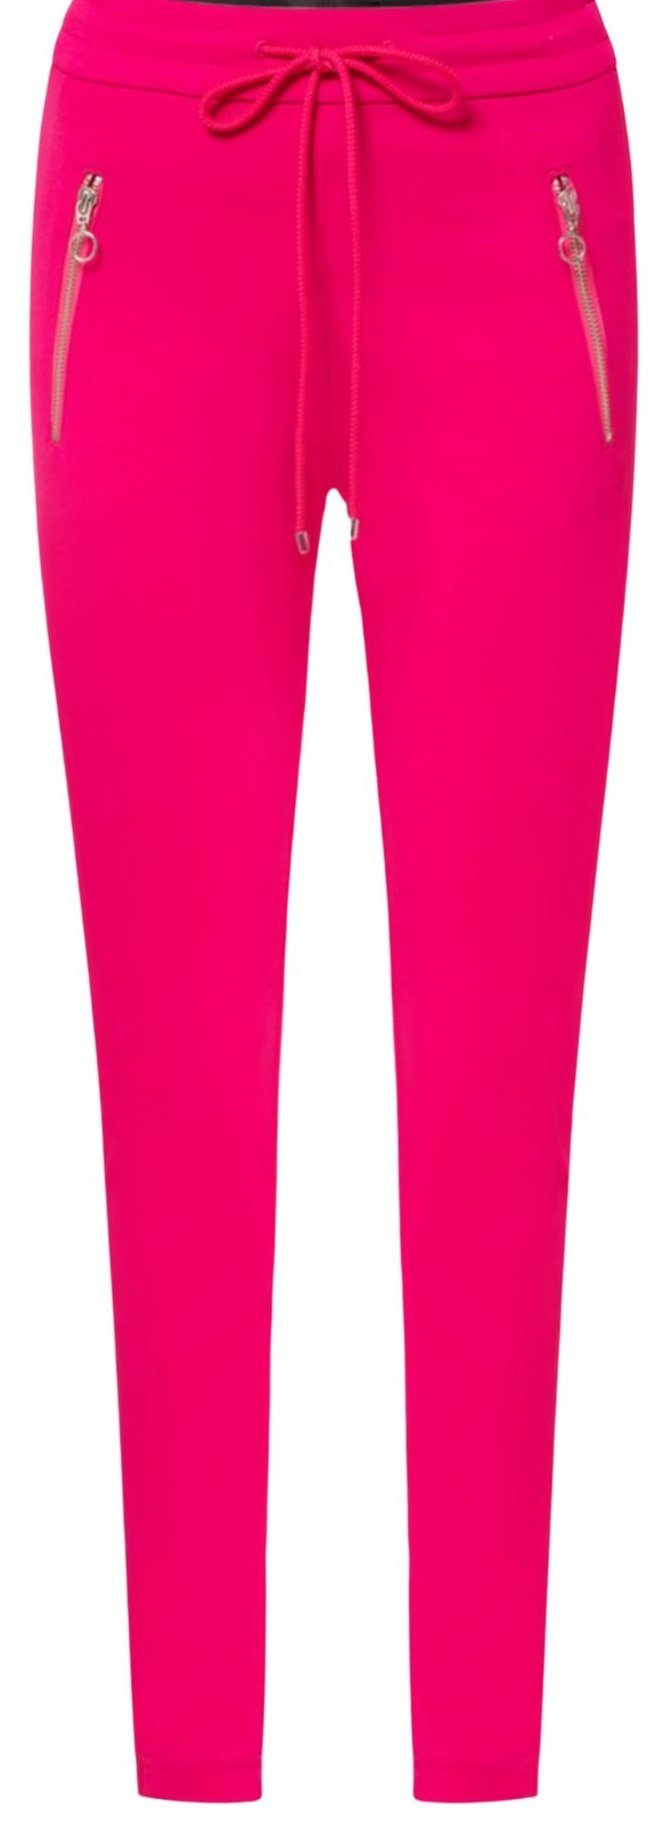 MAC Jogger Pants Easy Active Relaxed Fit mit Tunnelzug aus leichtem Techno Stretch virtual pink